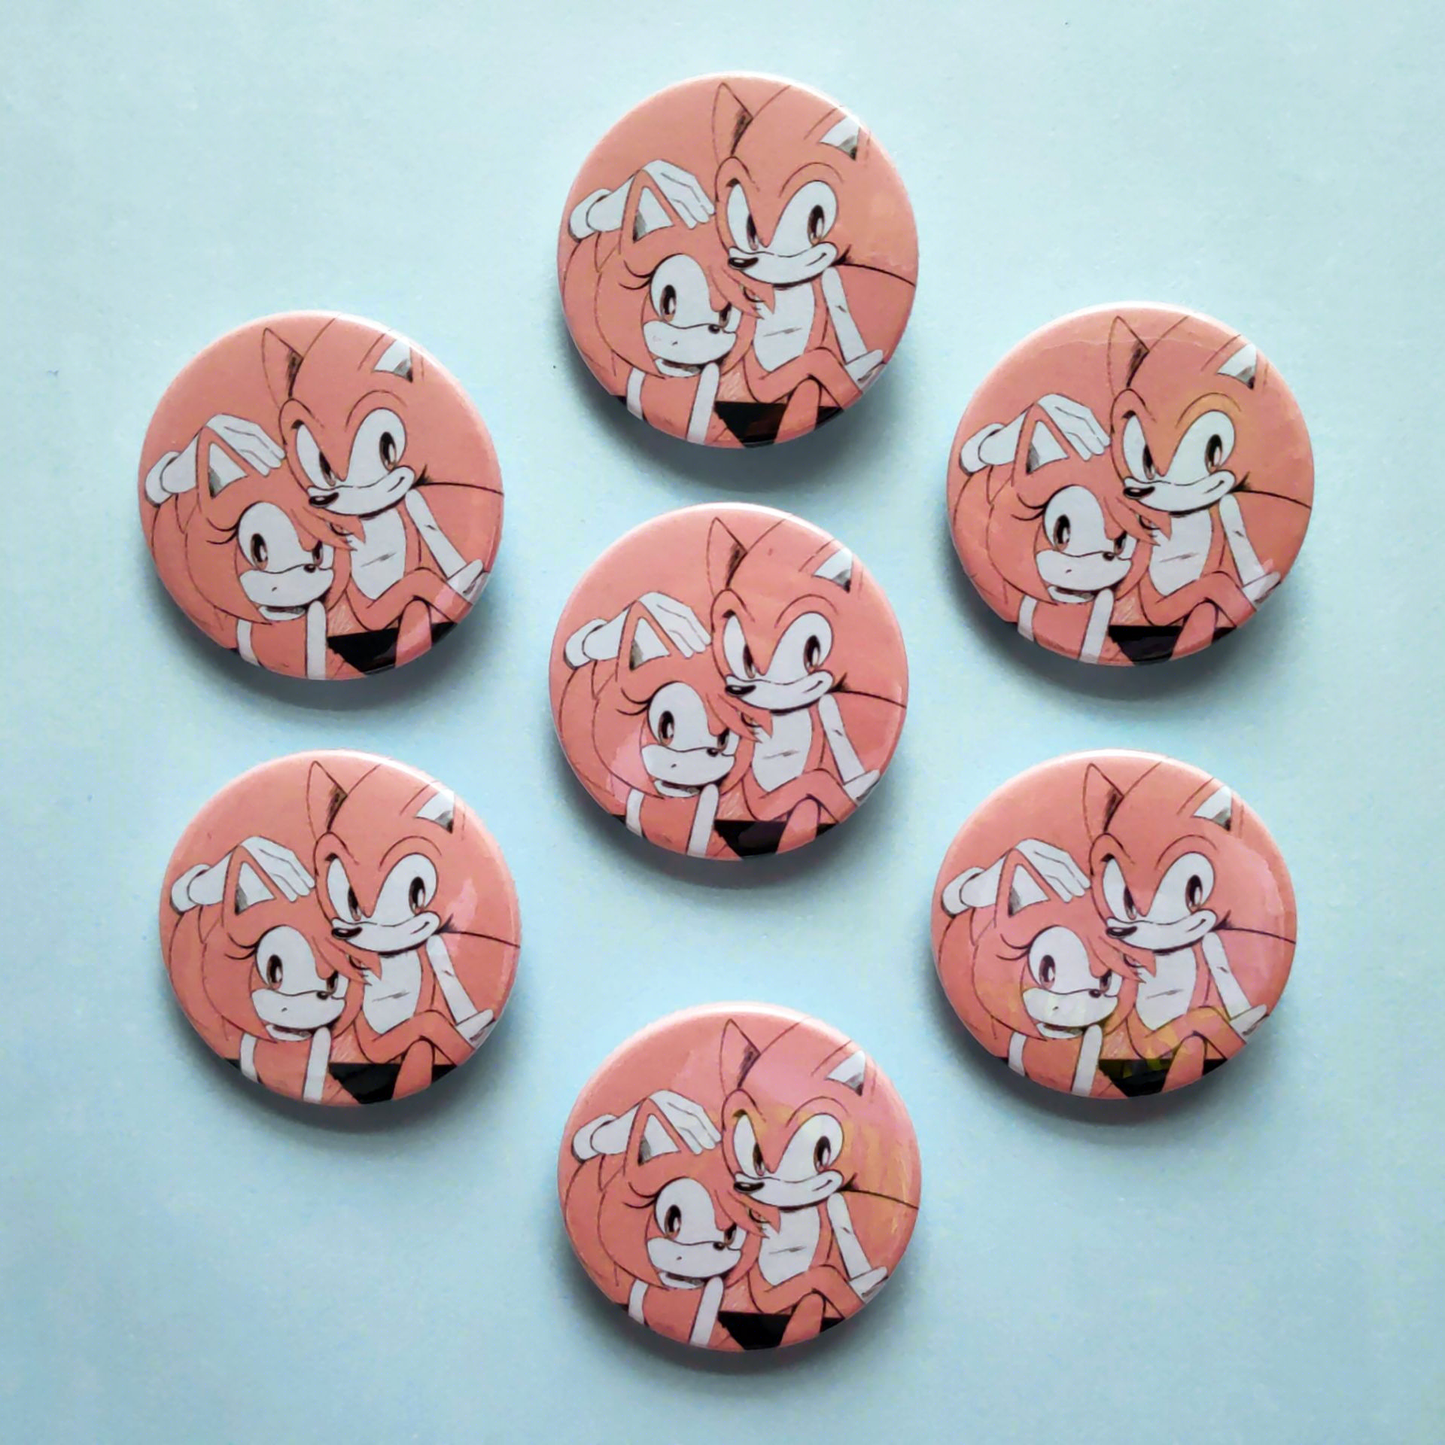 Photo of 7 pink Sonic and Amy button badges laid across a blue background.